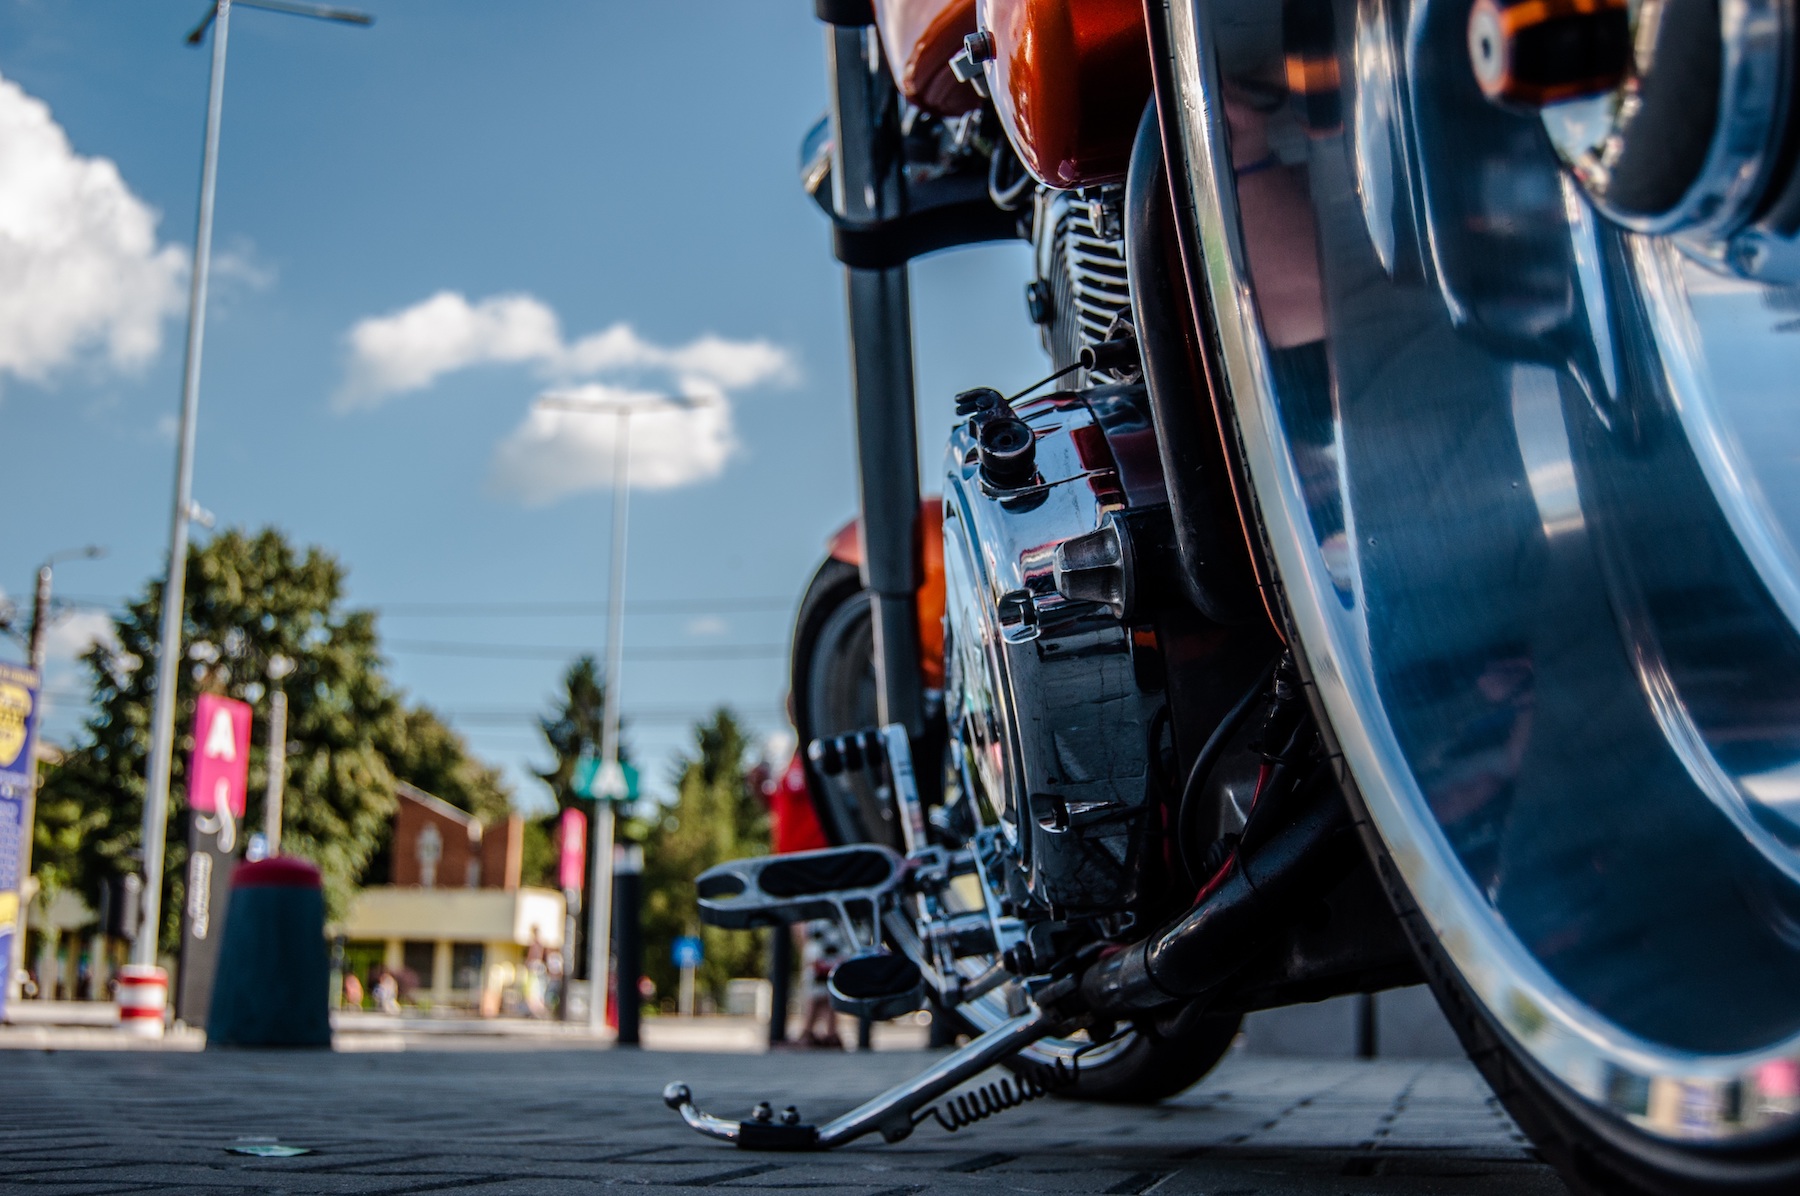 After a motorcycle accident, contact an attorney in Baton Rouge to help protect your legal rights.